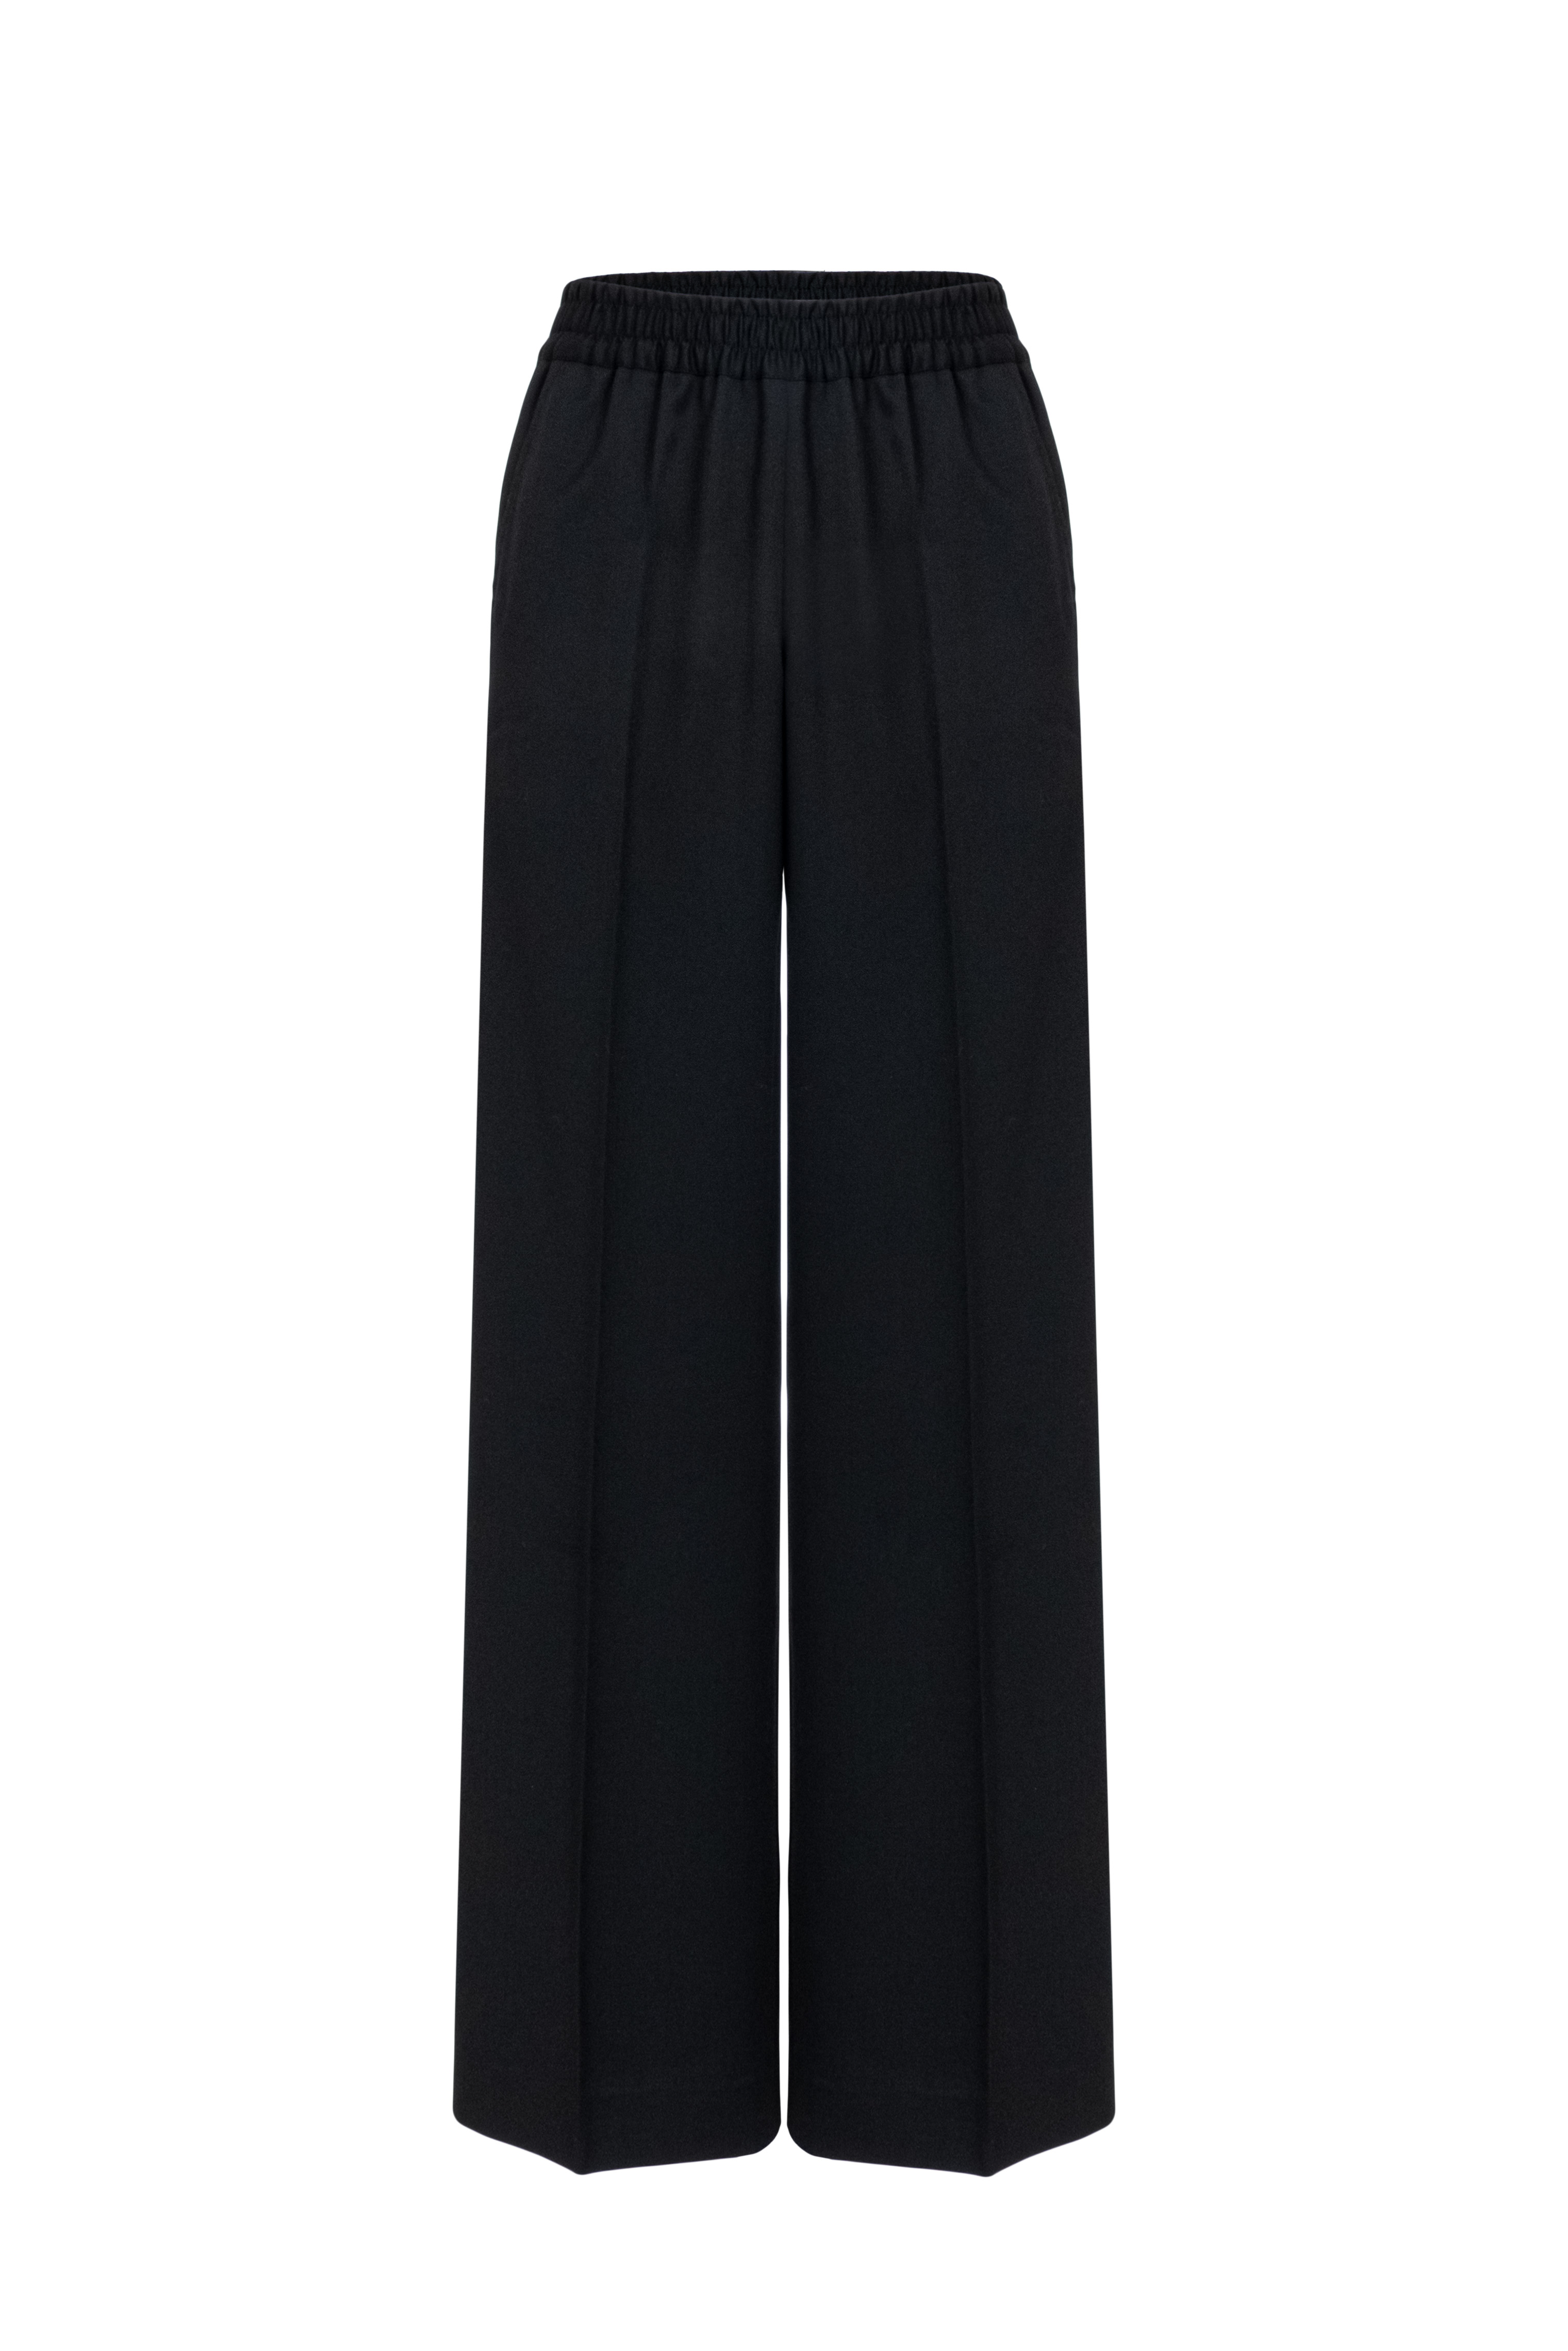 Trousers 4759-01 Black from BRUSNiKA